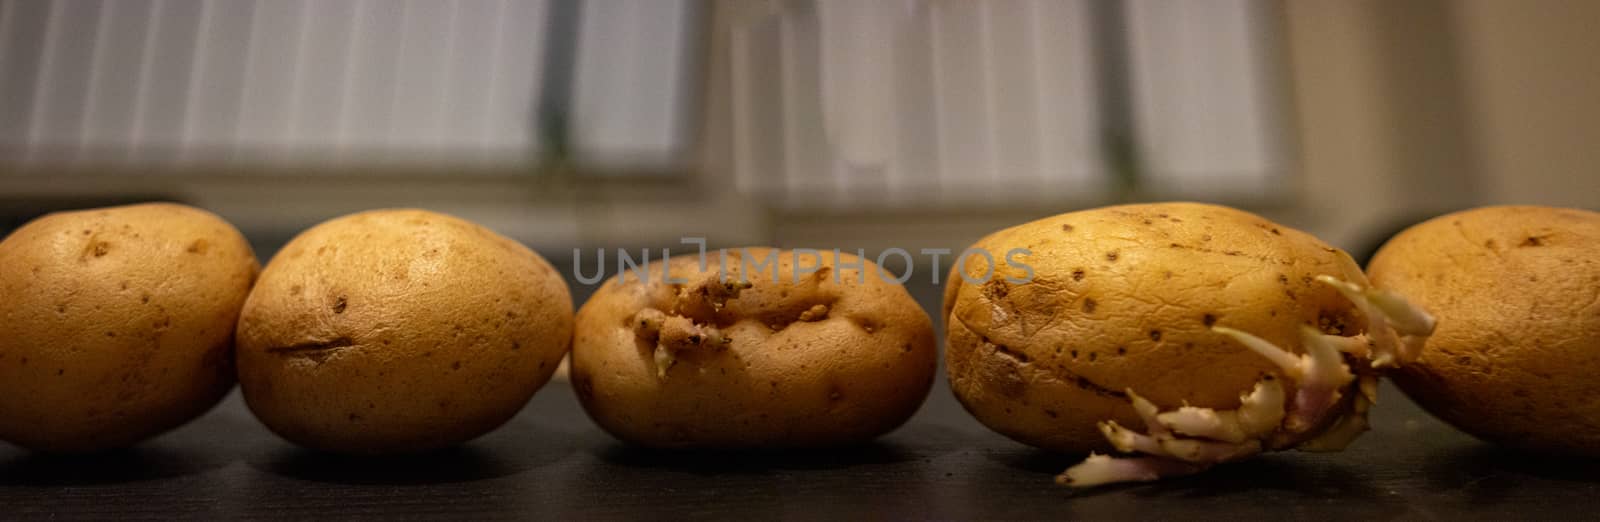 Panorama of potatoes. Good photo for food blogs or related themes.